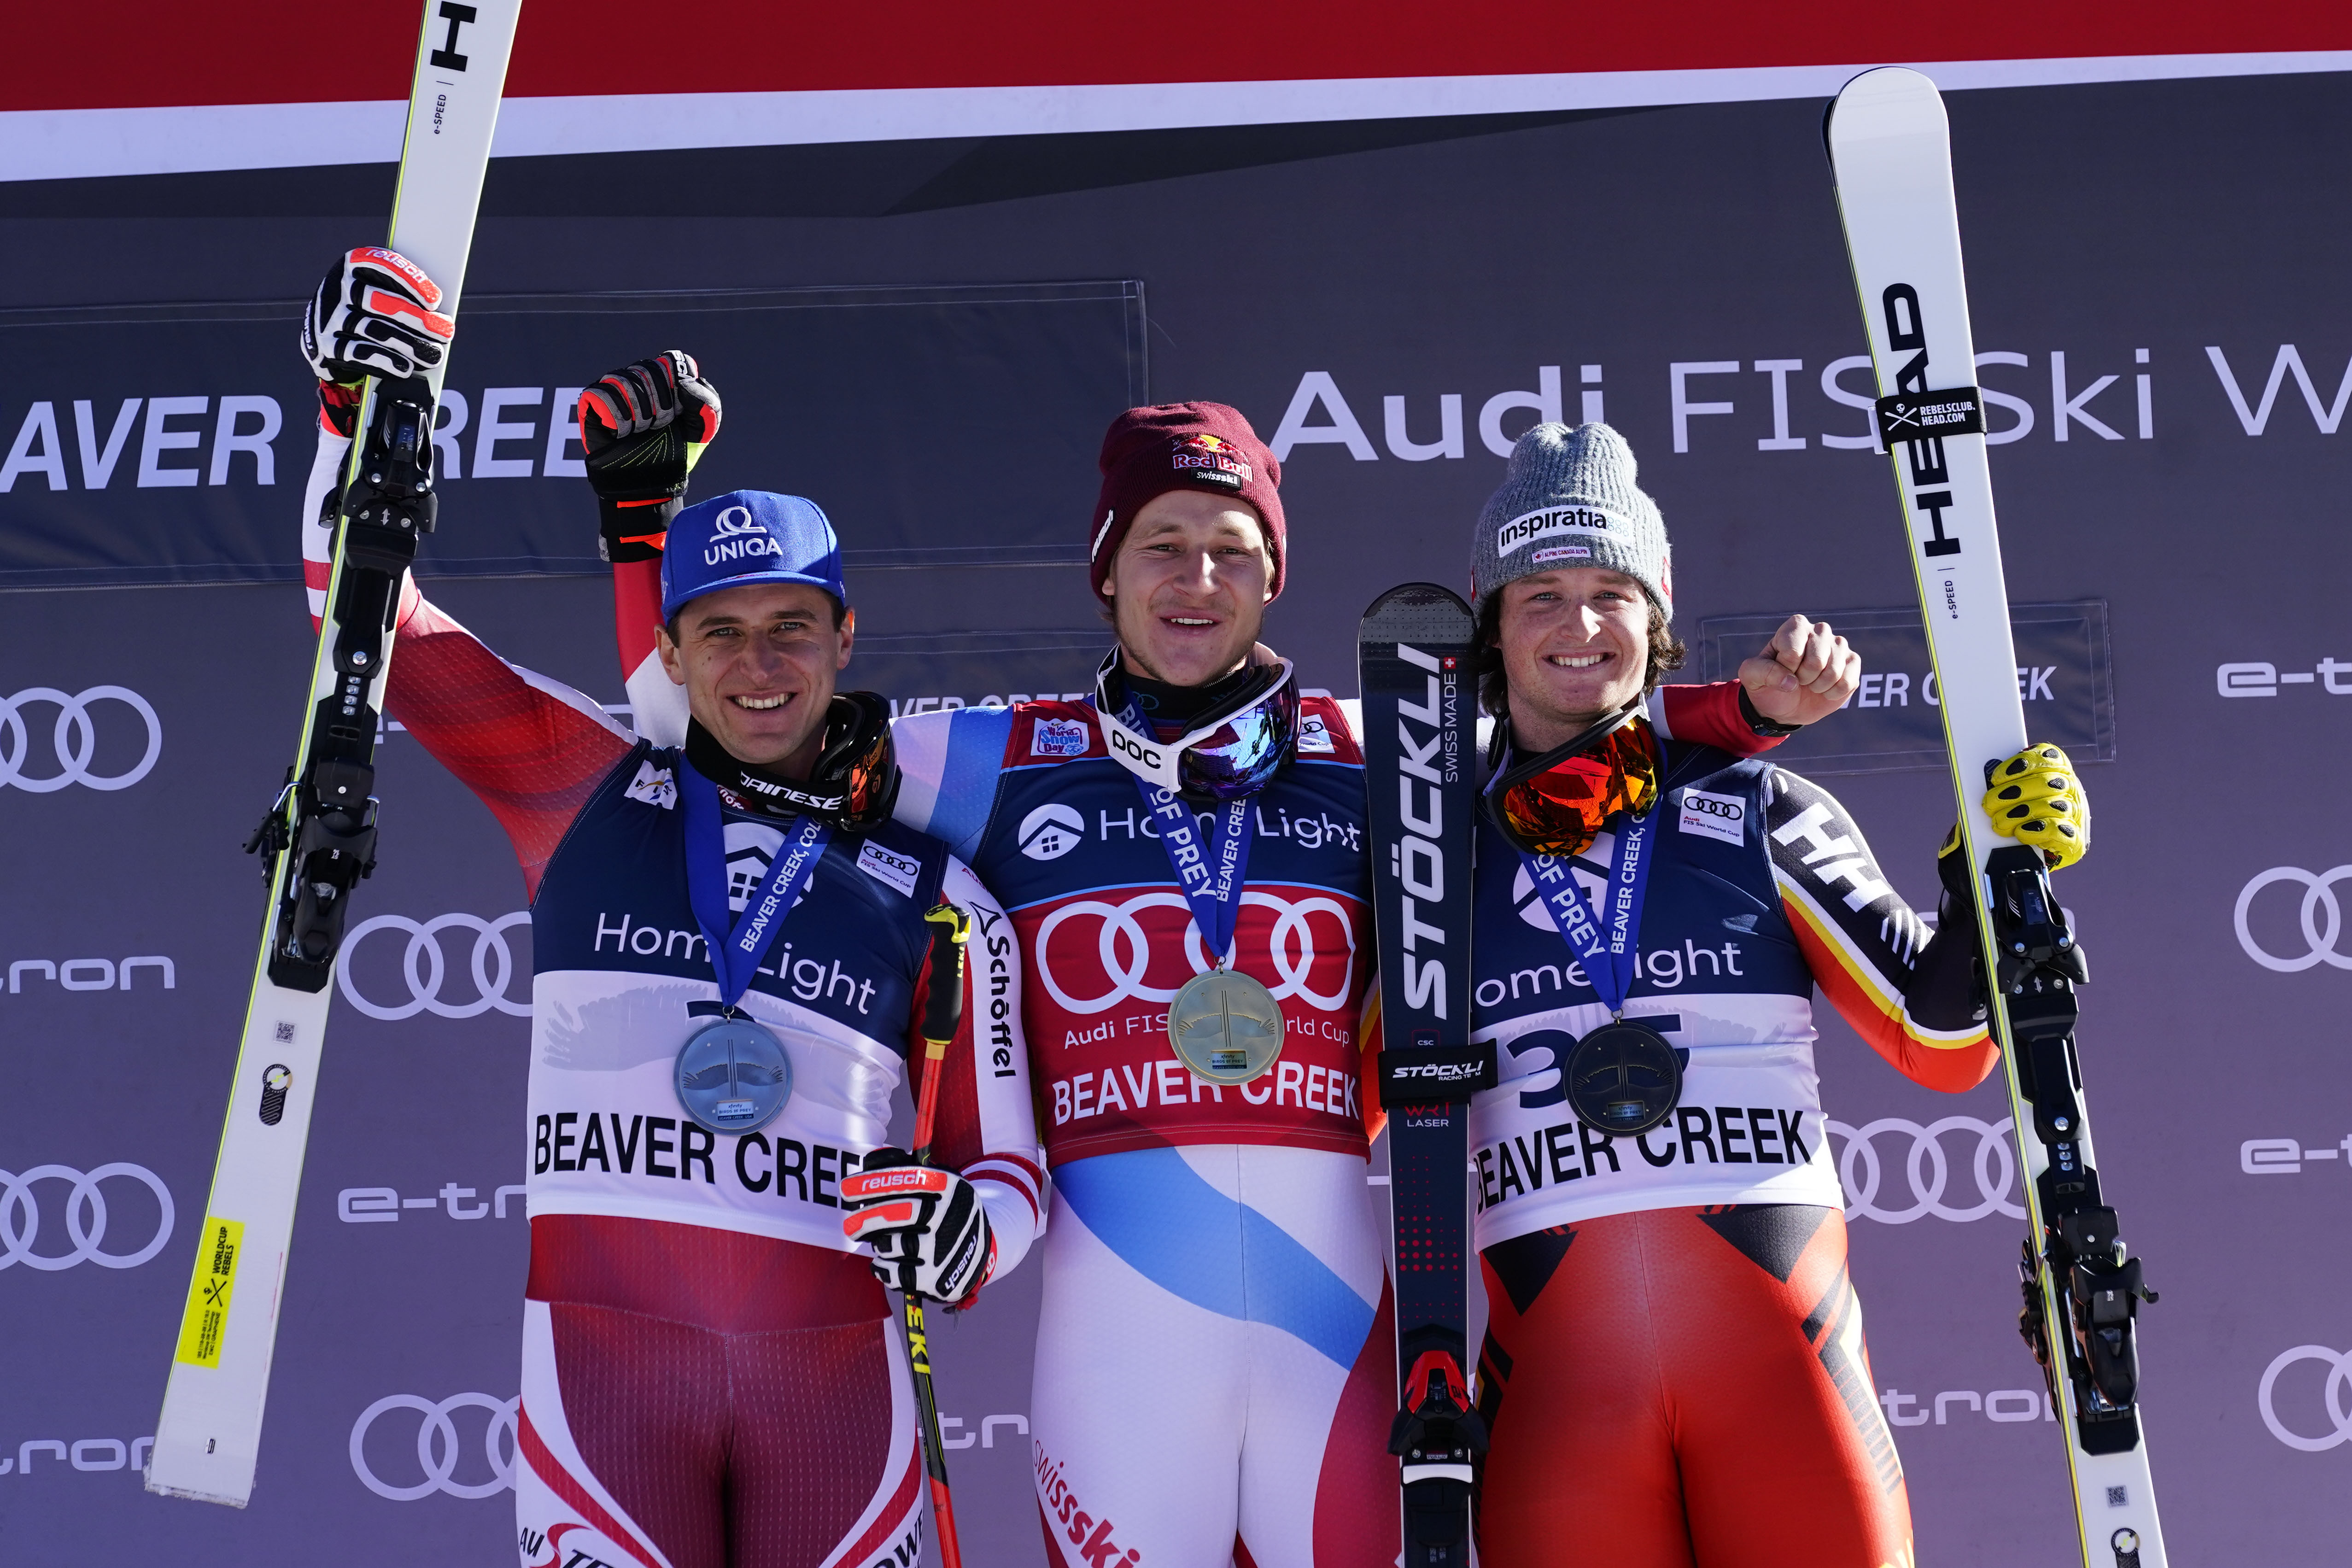 Dec 2, 2021; Beaver Creek, Colorado, USA; Second place Matthias Mayer of Austria (left), first place Marco Odermatt of Switzerland (center), and third place Broderick Thompson of Canada (right) pose for photos on the podium during first of two men's Super G races at the Birds of Prey FIS alpine skiing World Cup at Beaver Creek. Mandatory Credit: Michael Madrid-USA TODAY Sports